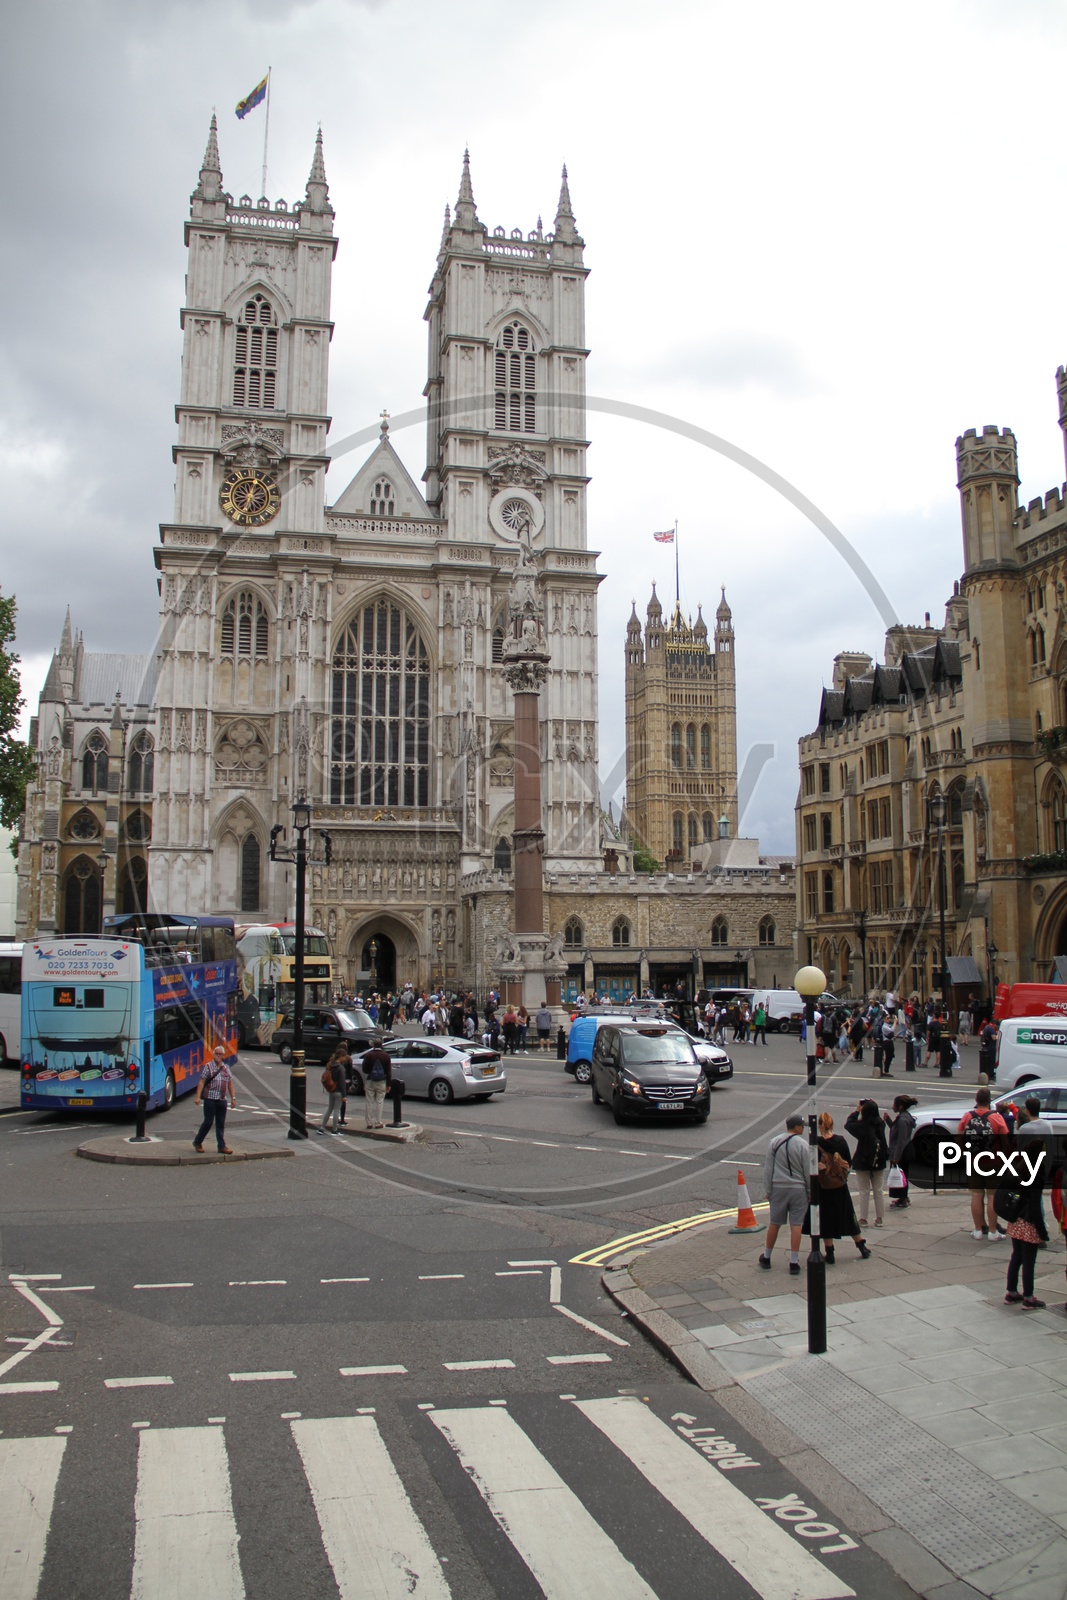 Traffic in-front of Westminster Abbey or Collegiate Church